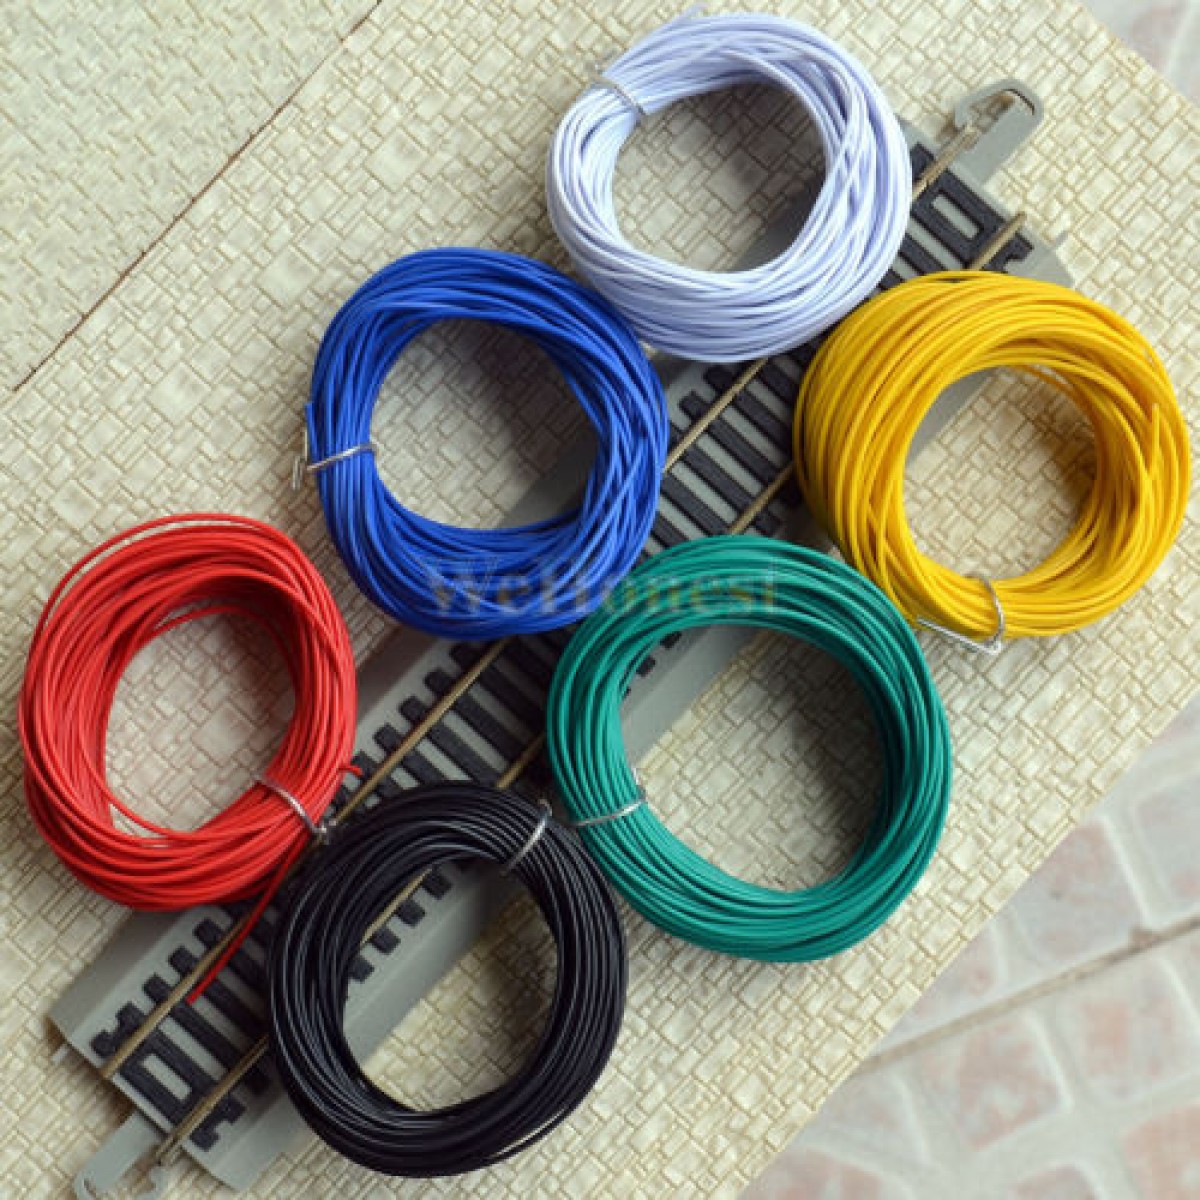 6 Rolls Assorted Colors Stranded Equipment Wires 7/0.15 for layouts 60 Meters